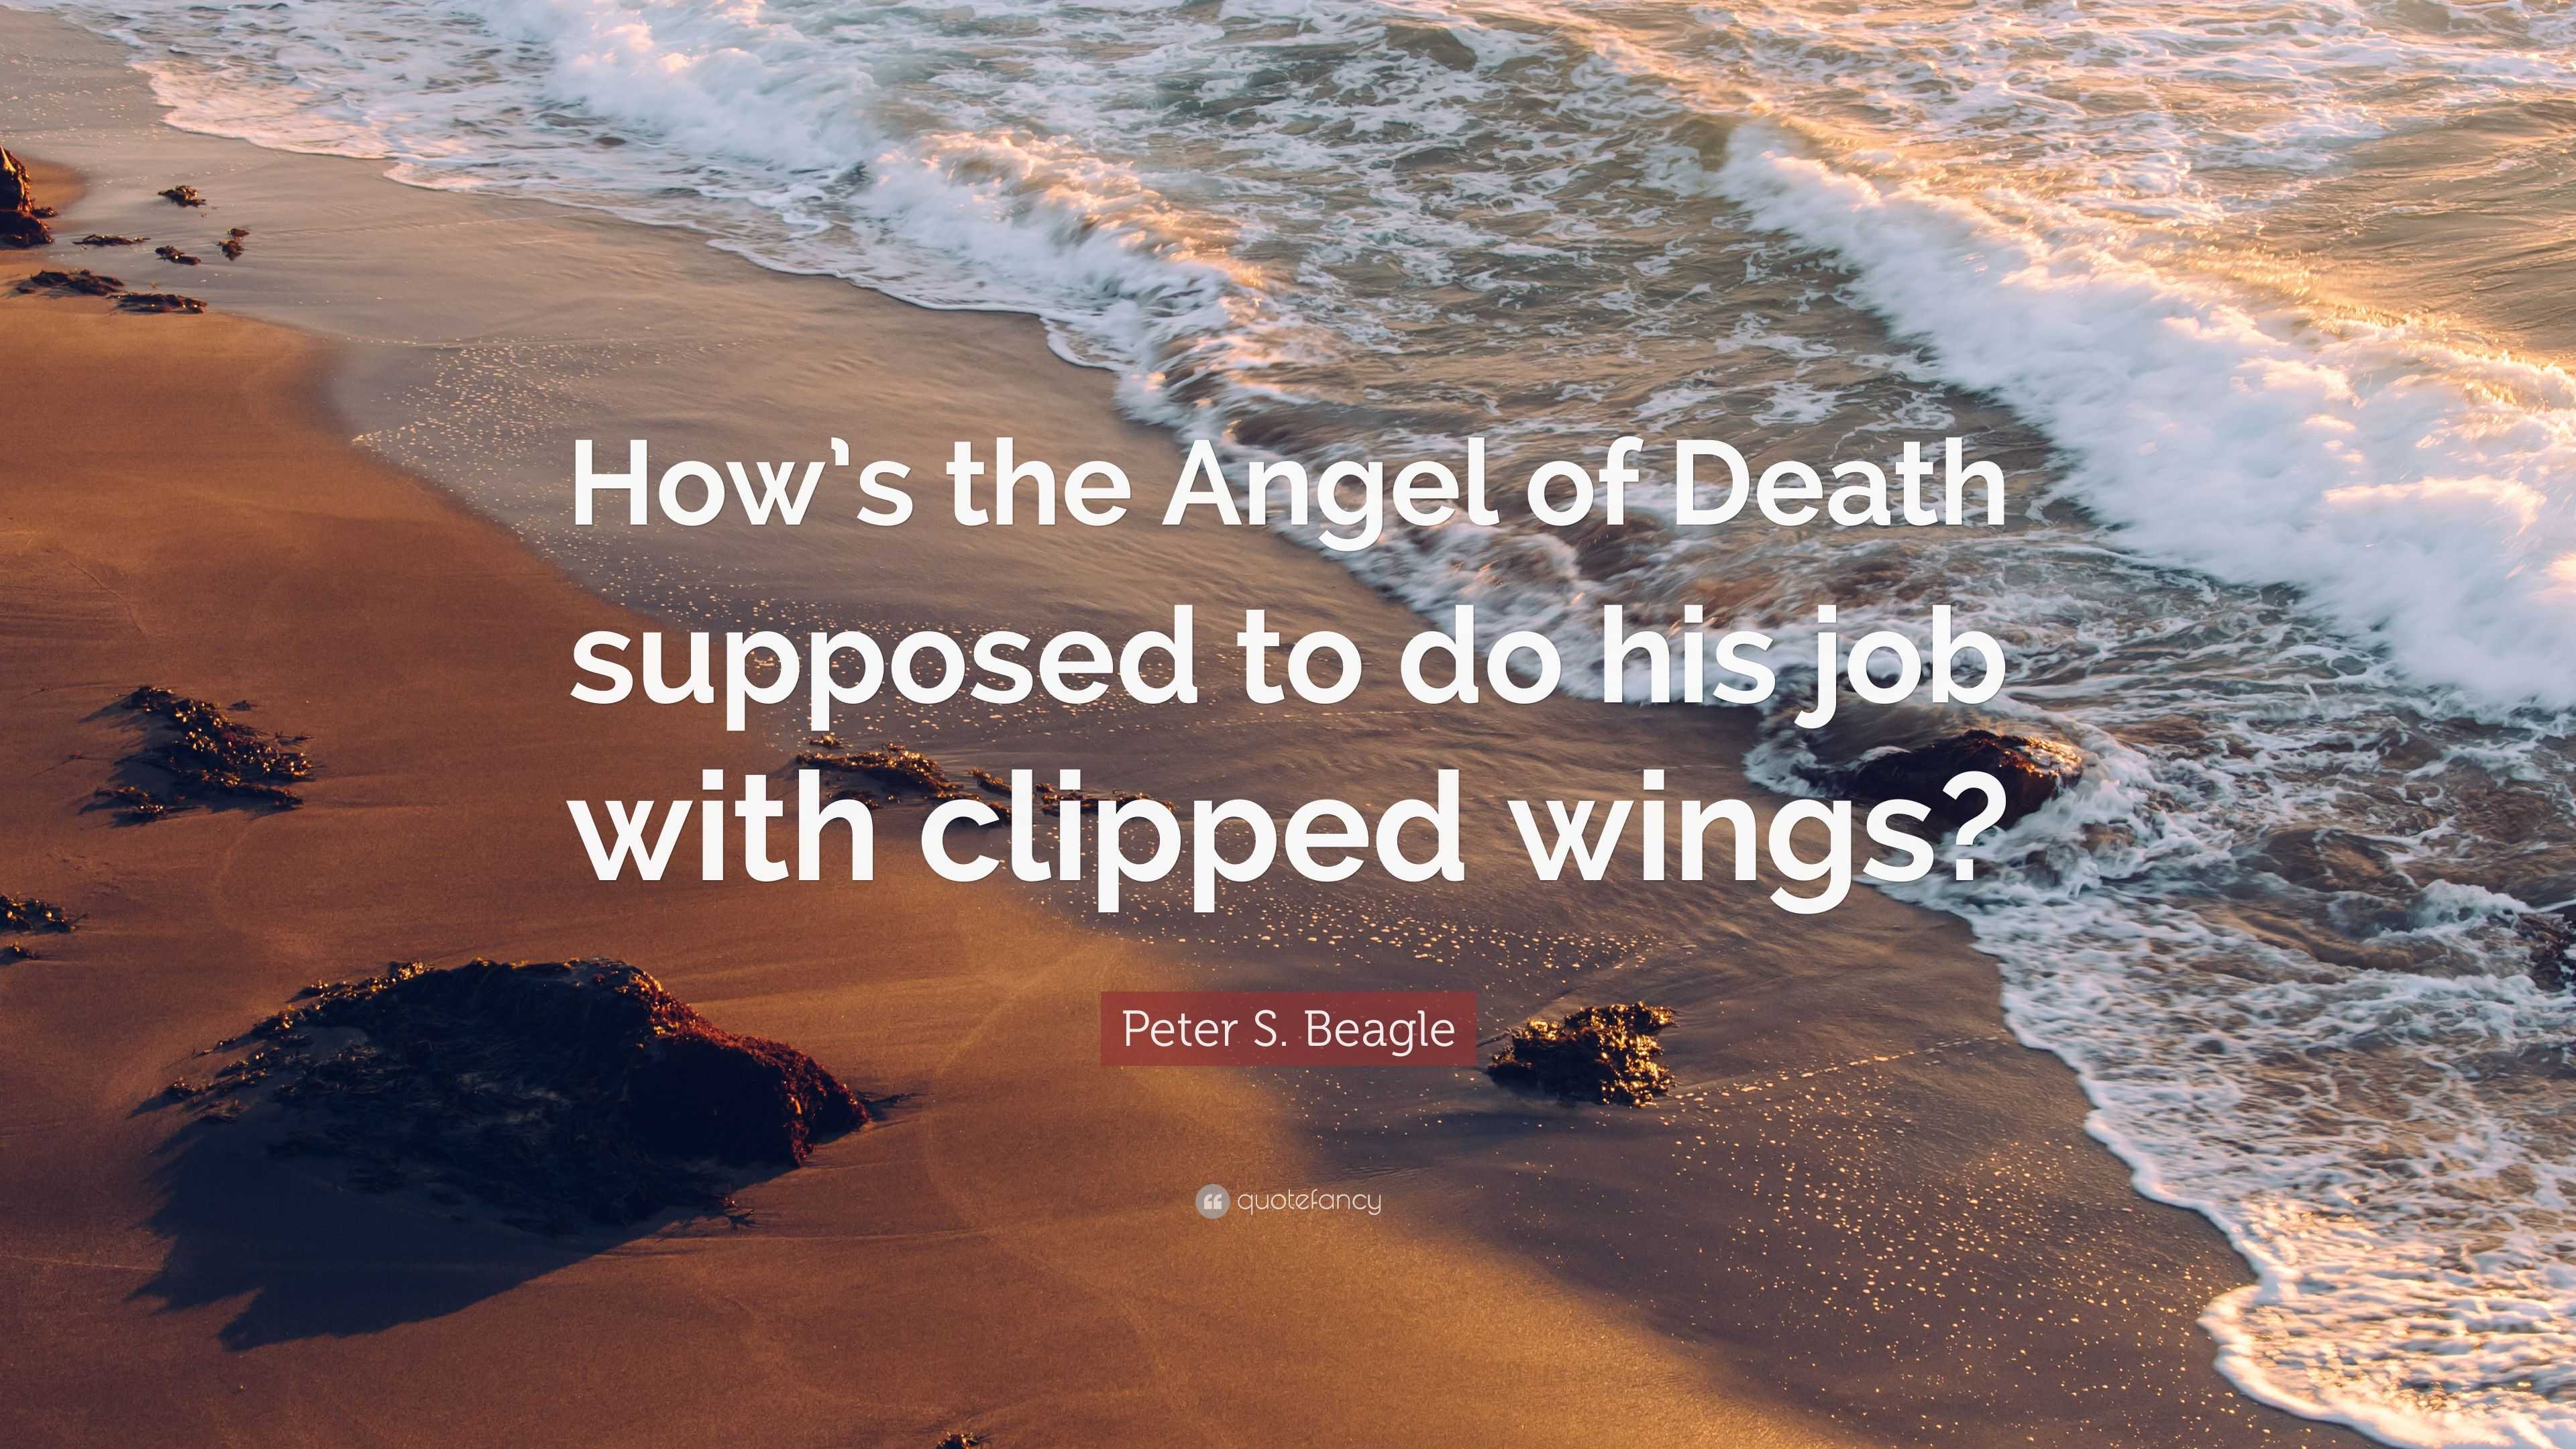 The Angel of Death Has One Job, and He Does It Well